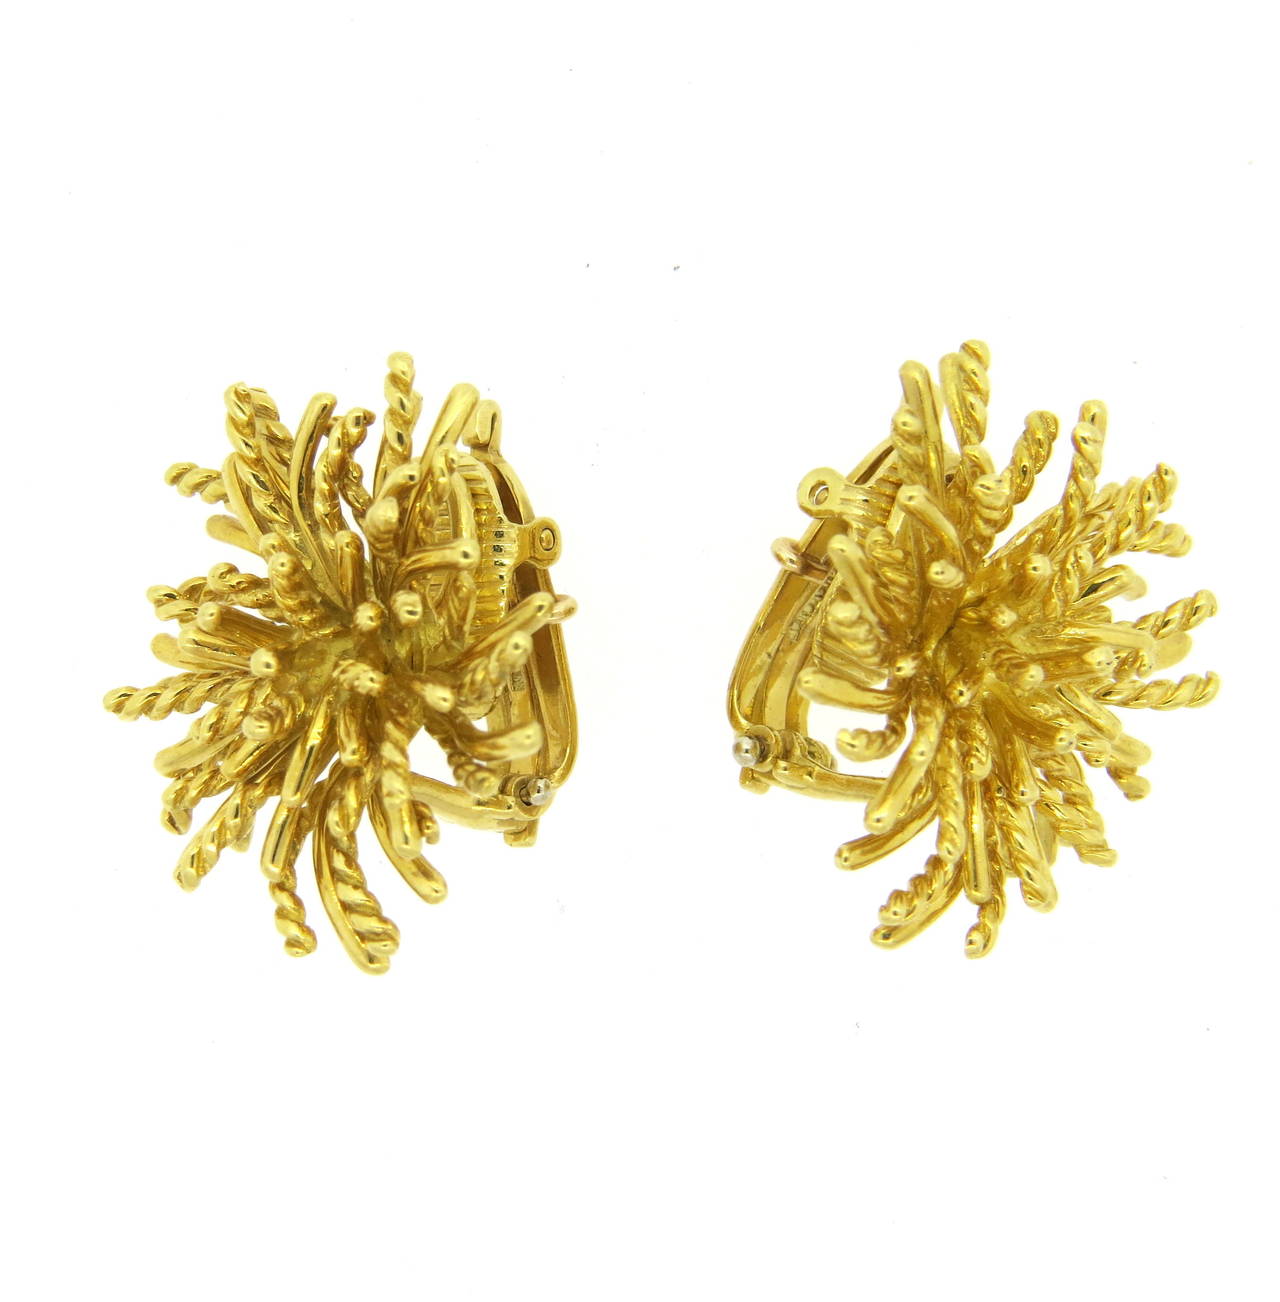 18k yellow gold anemone earrings, crafted by Tiffany & Co. Earrings measure 26mm x 25mm. Marked 18kt, Tiffany & Co. Weight - 20.8 grams